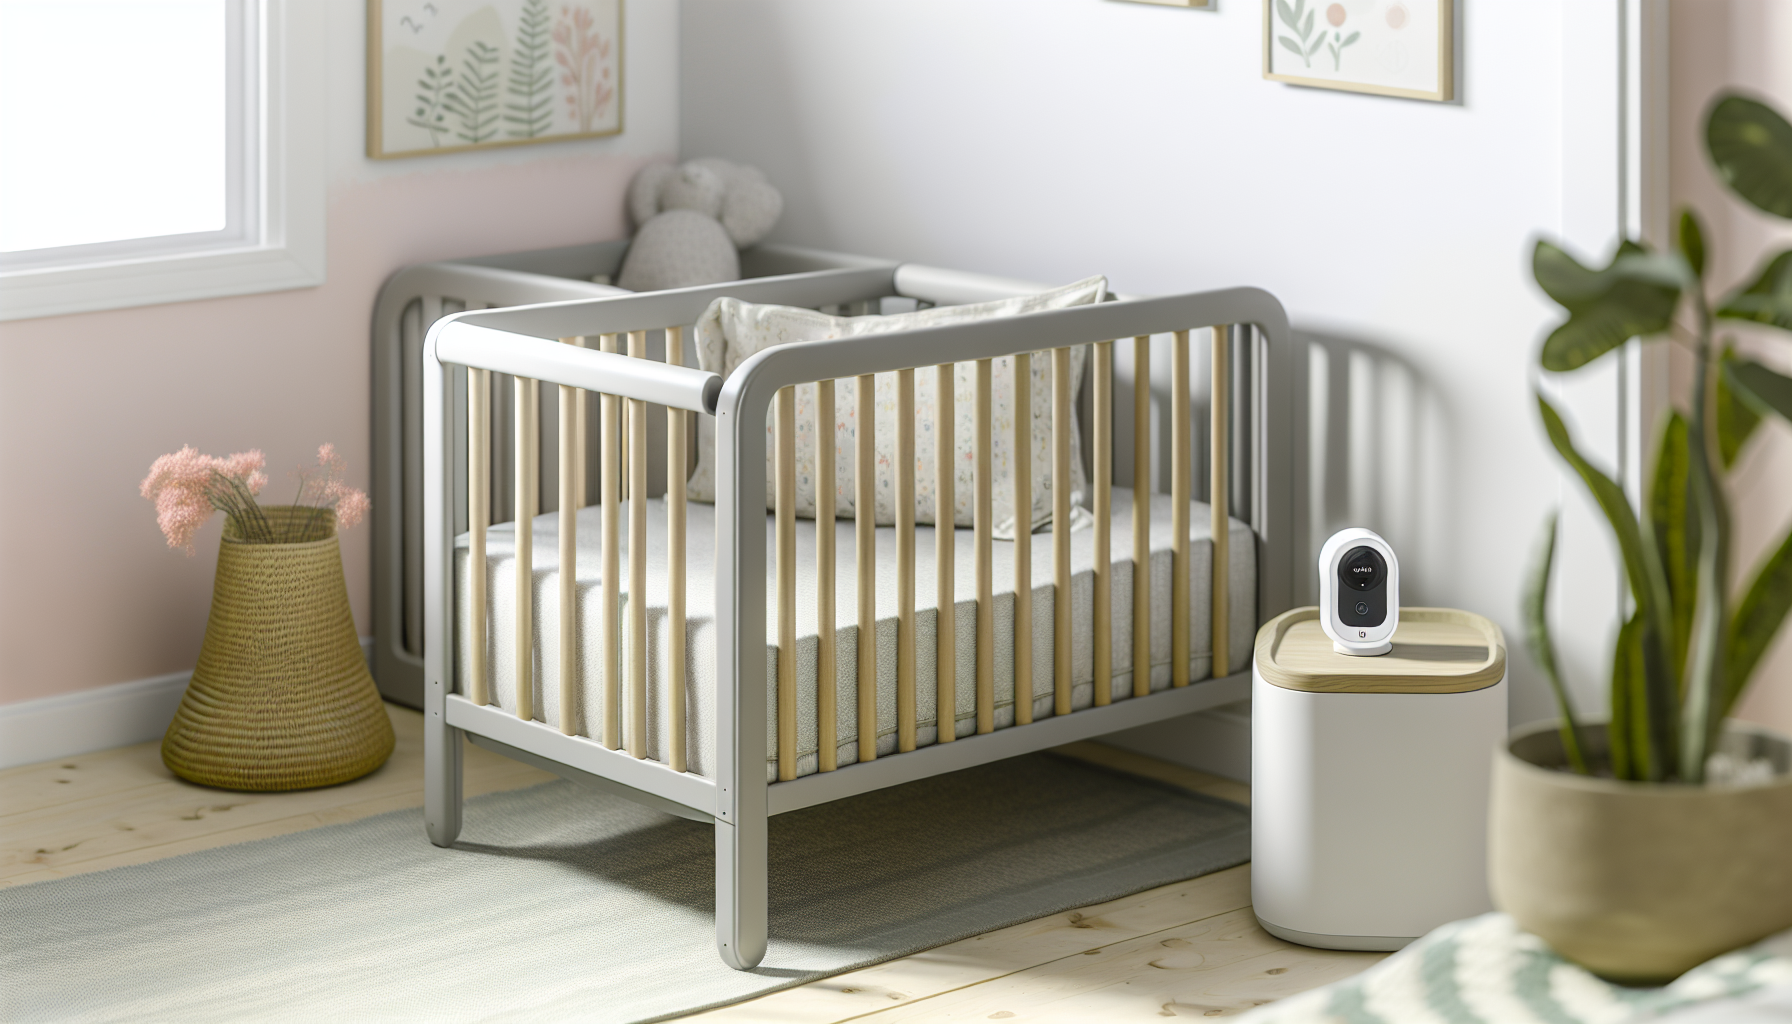 Safe sleep environment with a baby crib and soft bedding